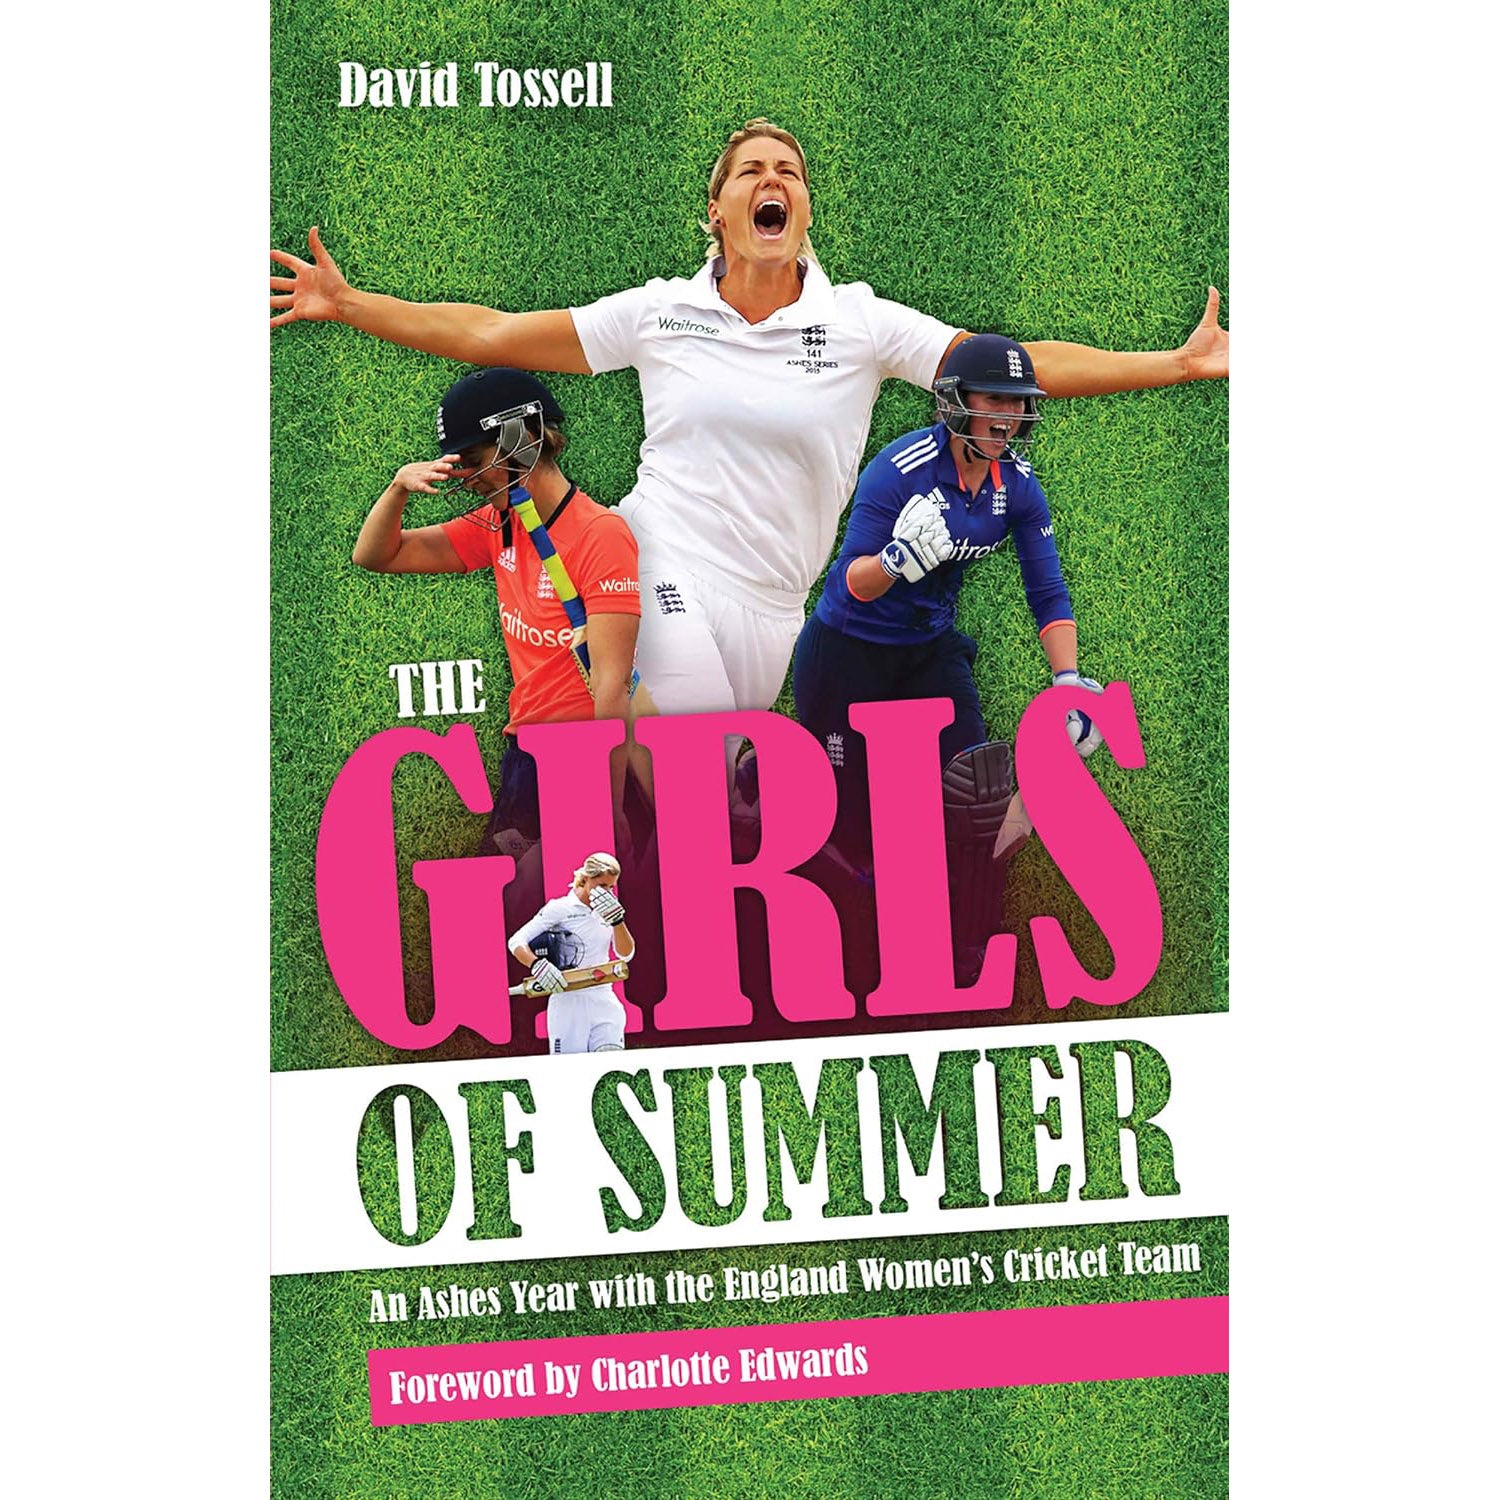 The Girls of Summer – An Ashes Year with the England Women's Cricket Team